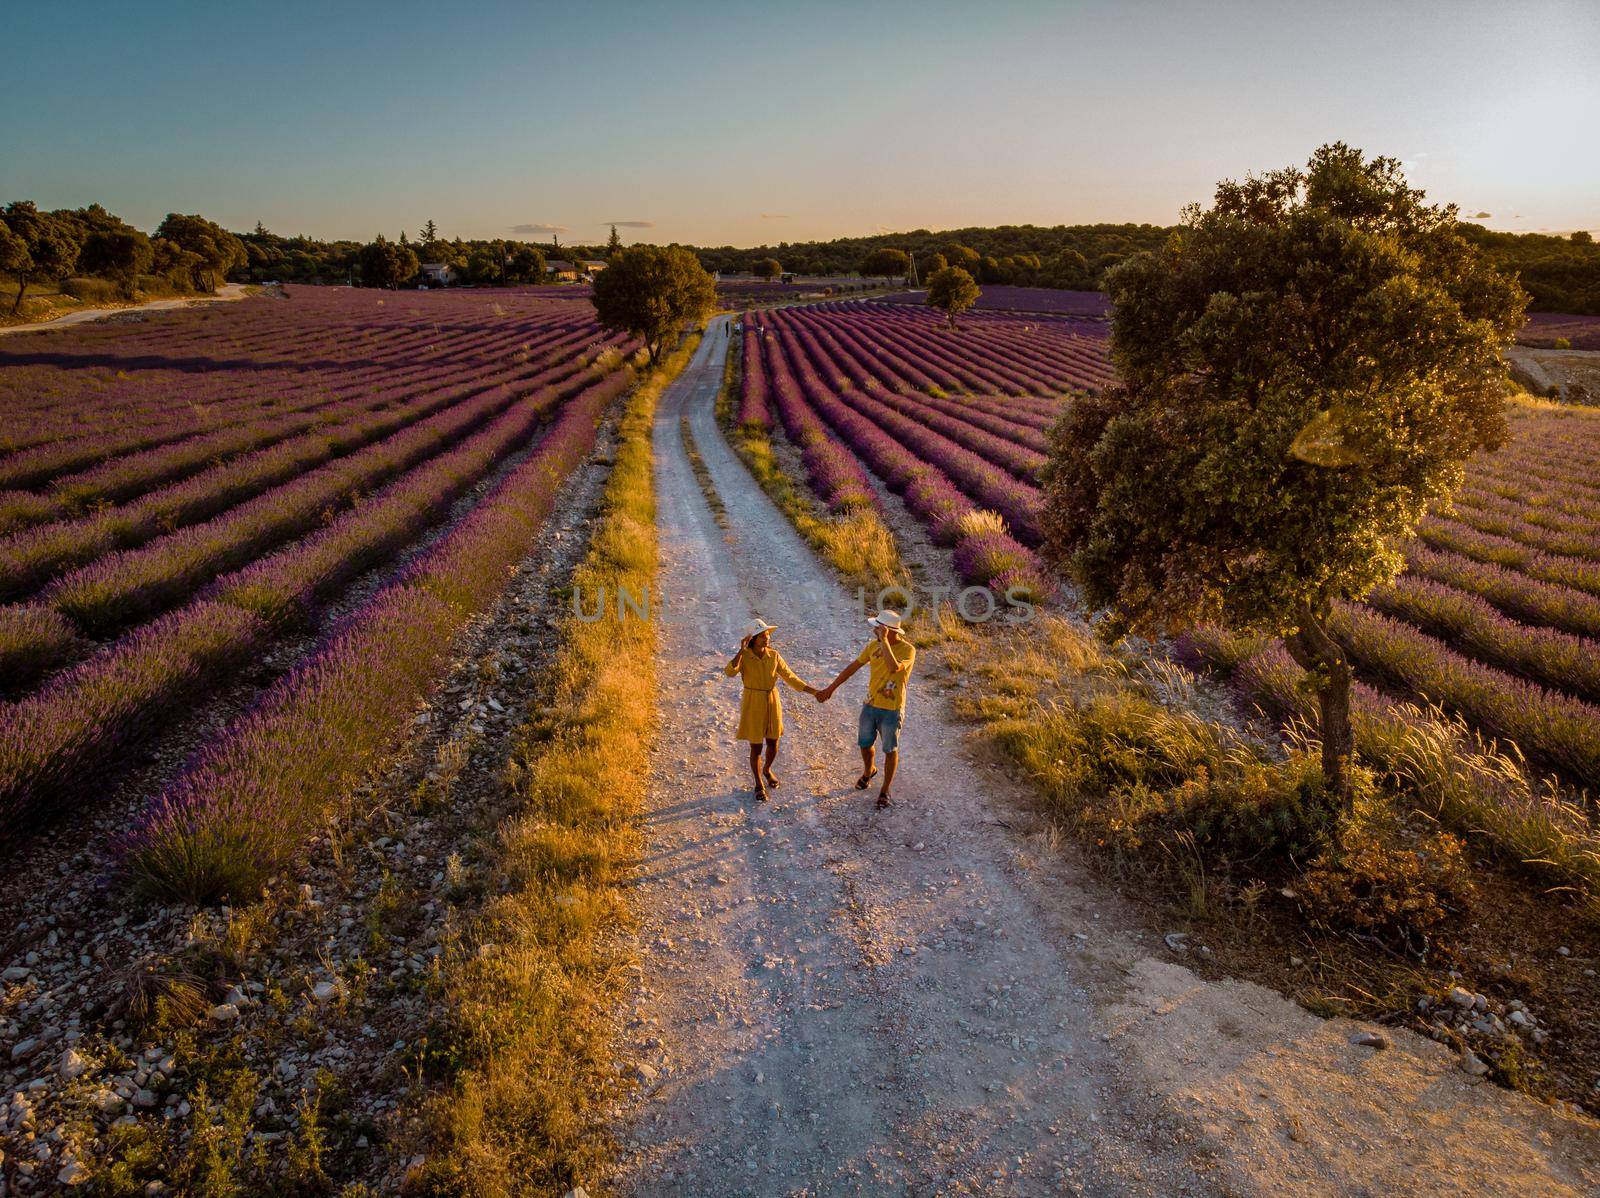 Lavender fields in Ardeche in southeast France. Drone aerial view